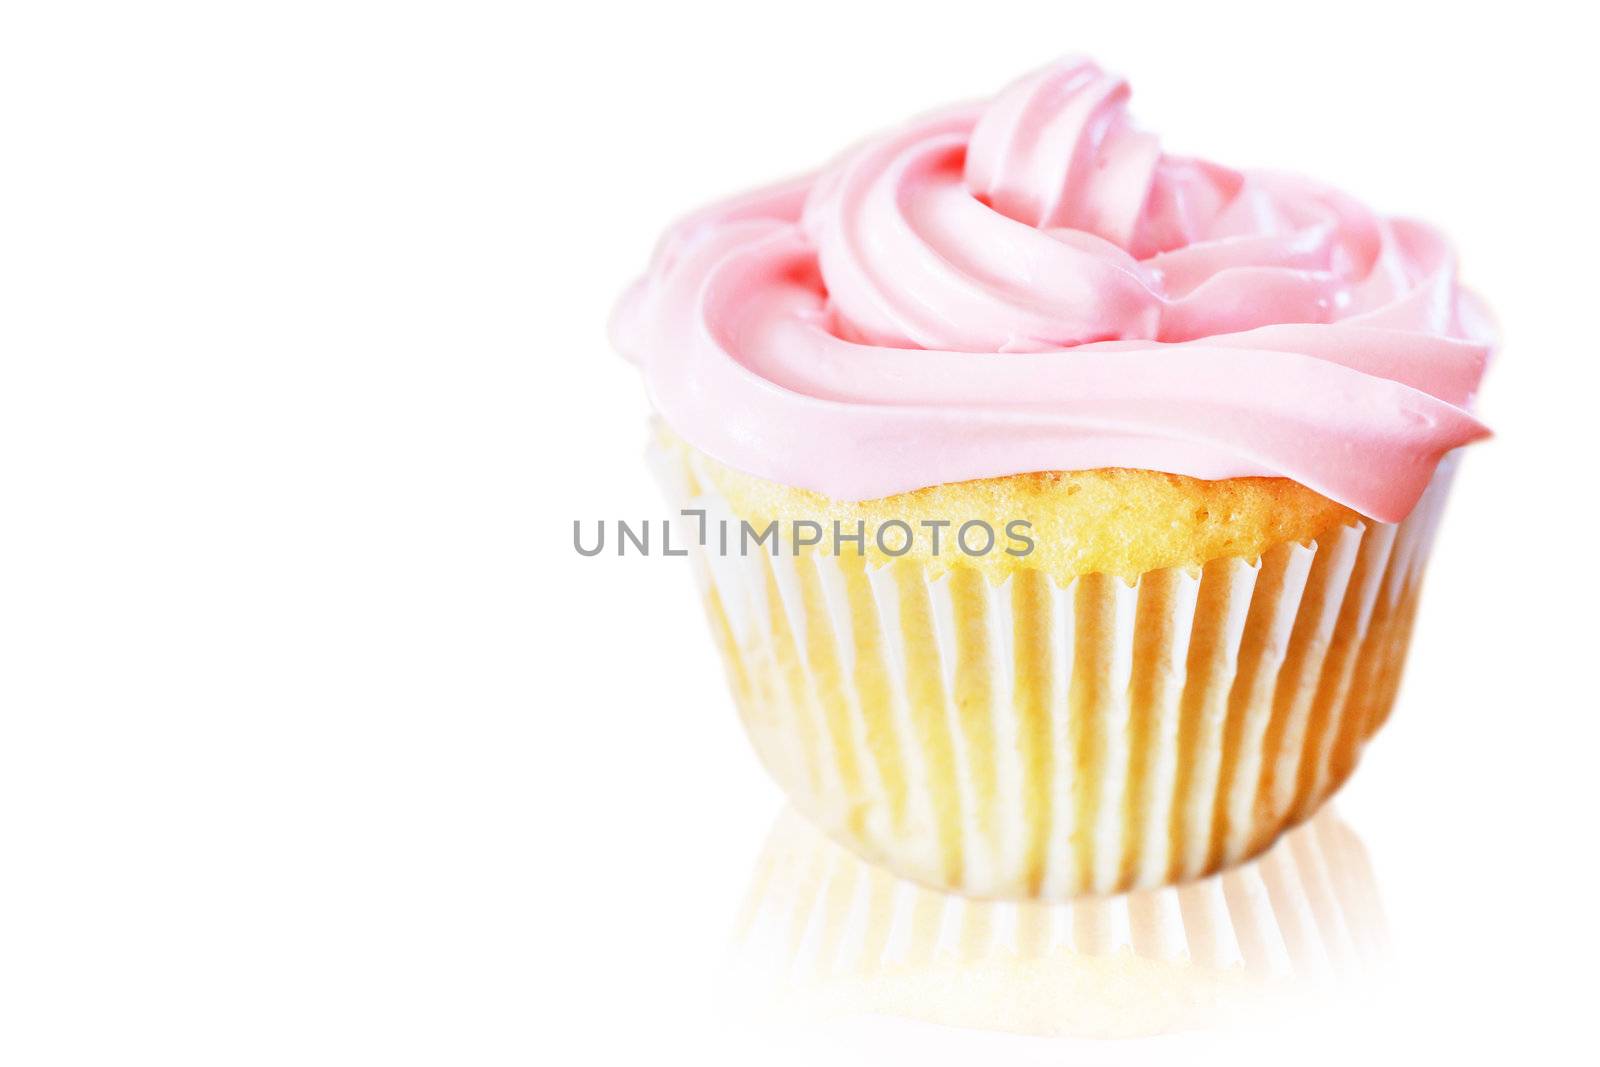 Vanilla cupcake with pink frosting by Mirage3